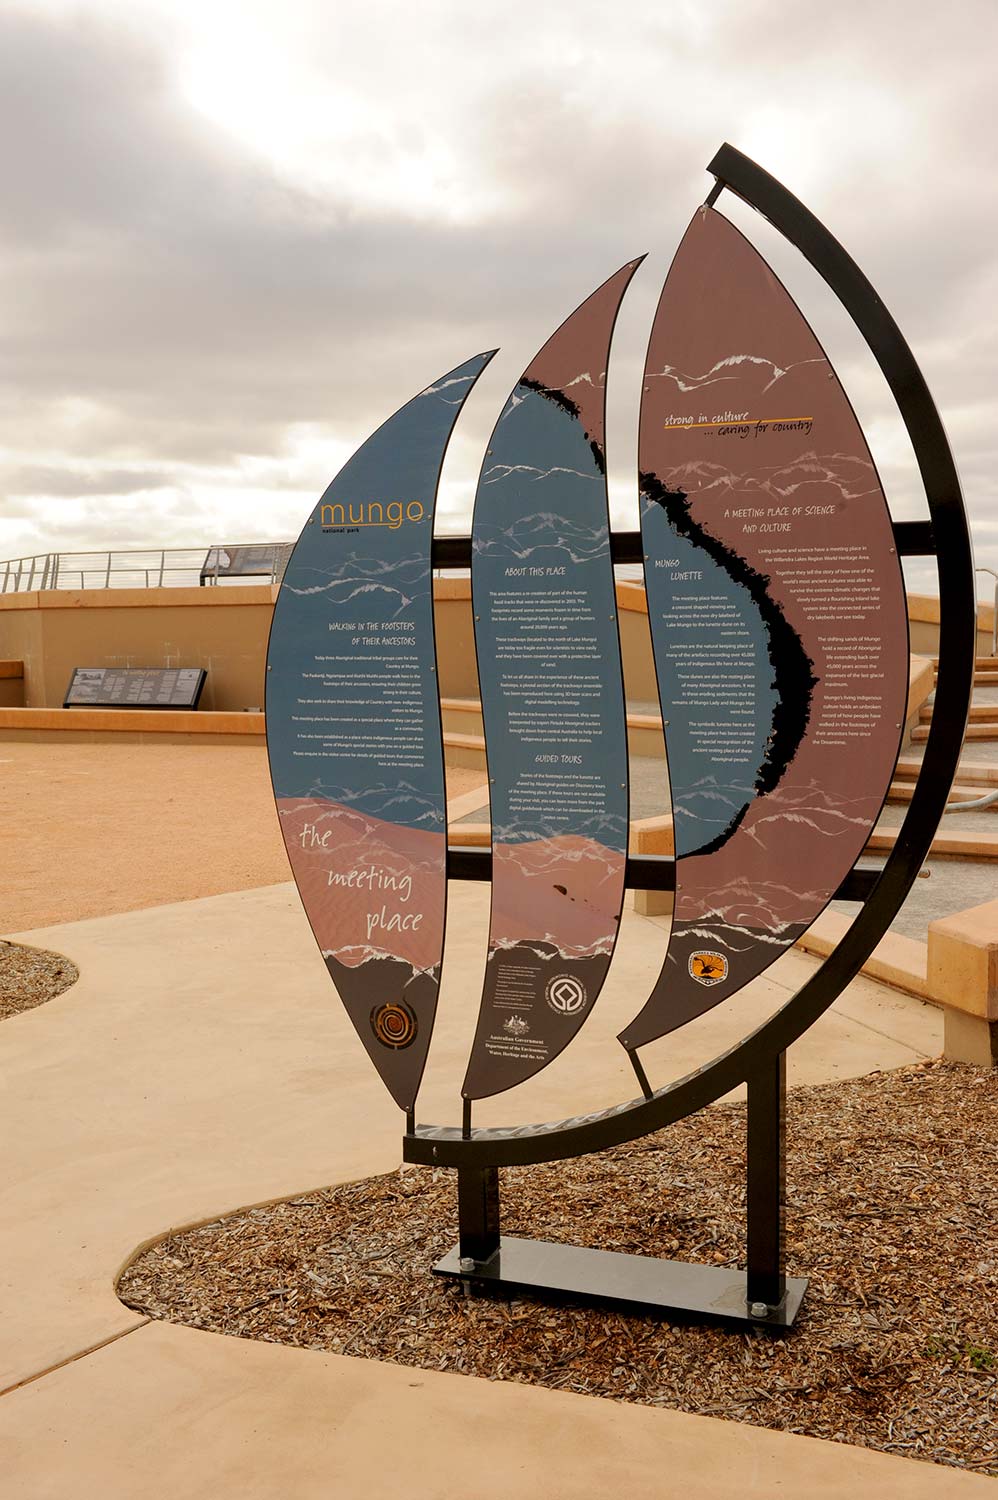 interpretive signage at the Meeting place, Mungo National Park